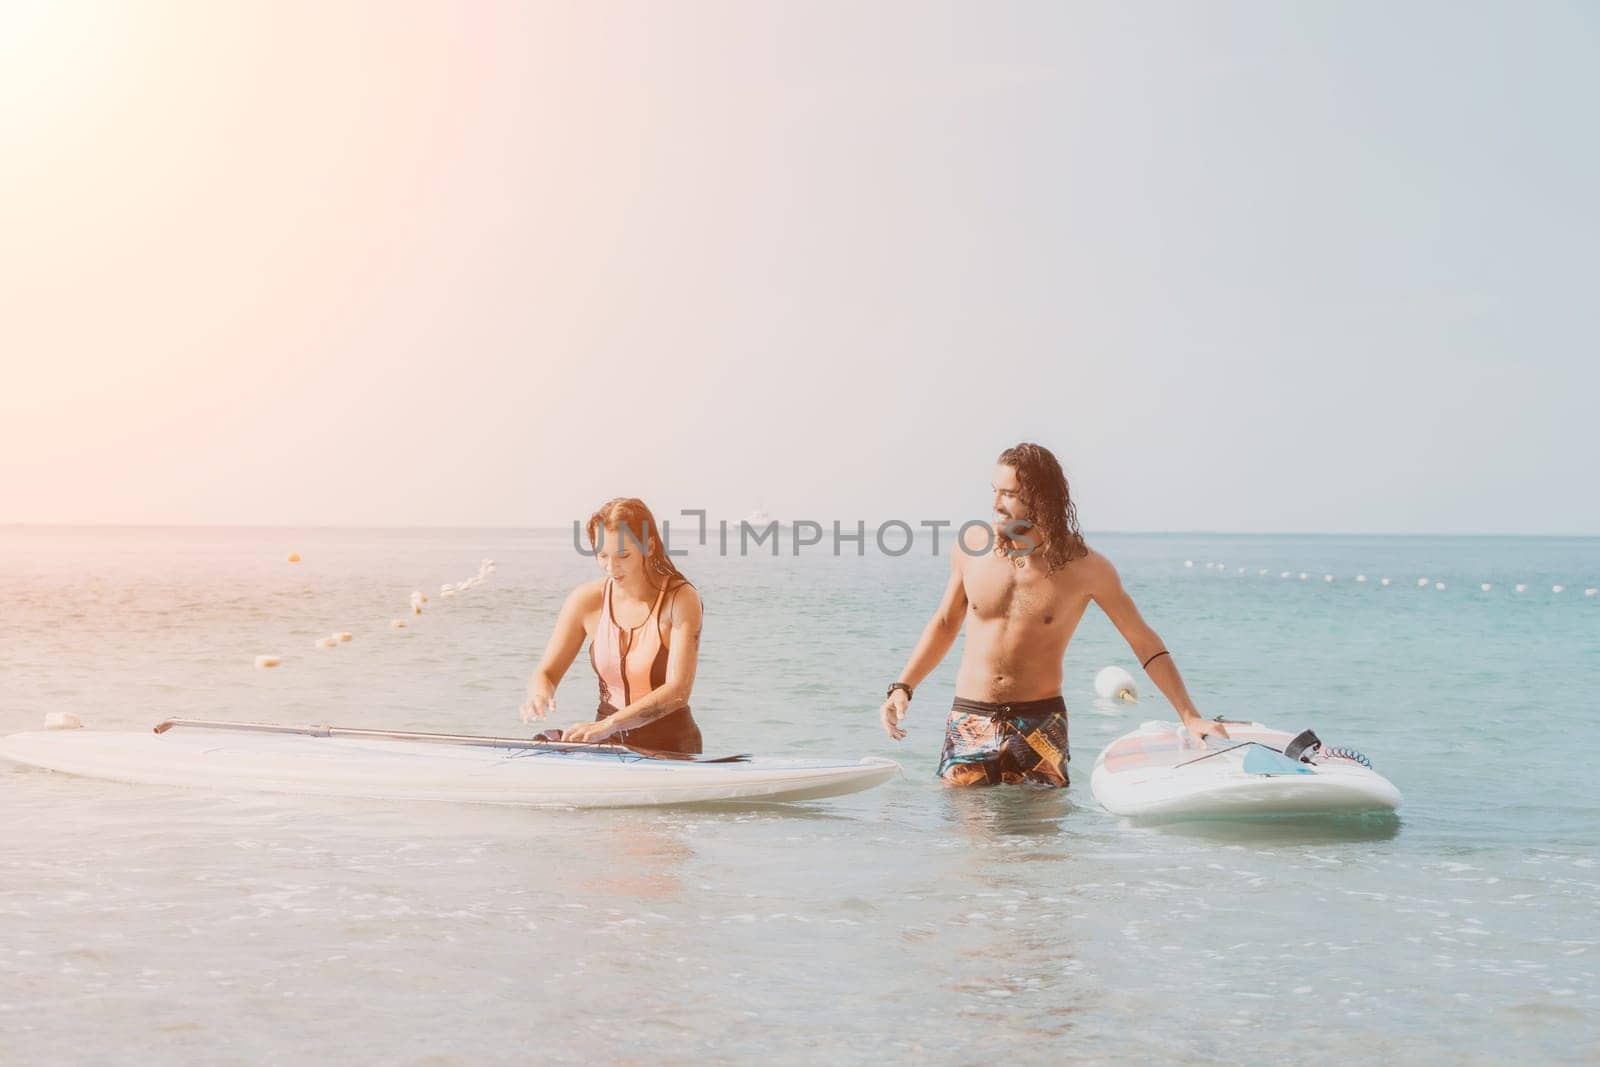 Woman man sea sup. Close up portrait of beautiful young caucasian woman with black hair and freckles looking at camera and smiling. Cute woman portrait in a pink bikini posing on sup board in the sea. by panophotograph